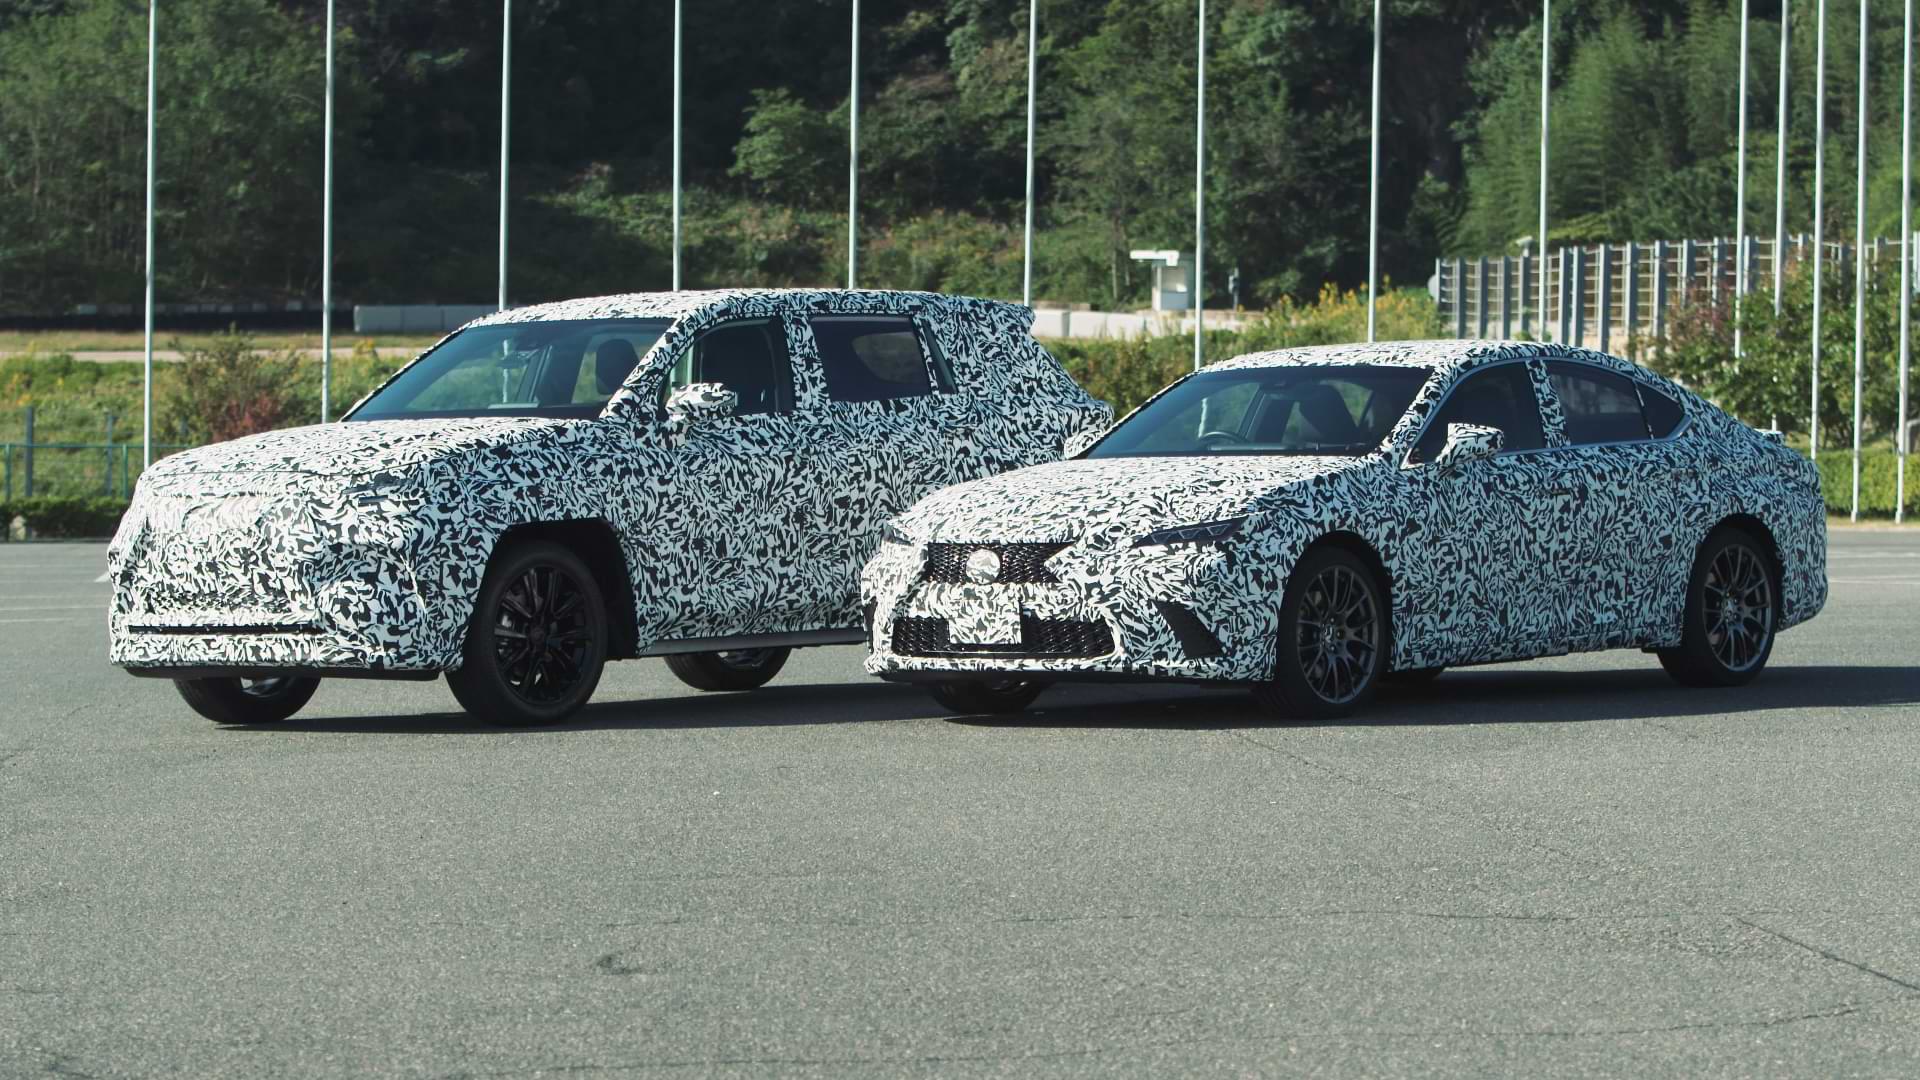 Black and white speckles Lexus BEV and HEV prototypes sit on a concrete road.